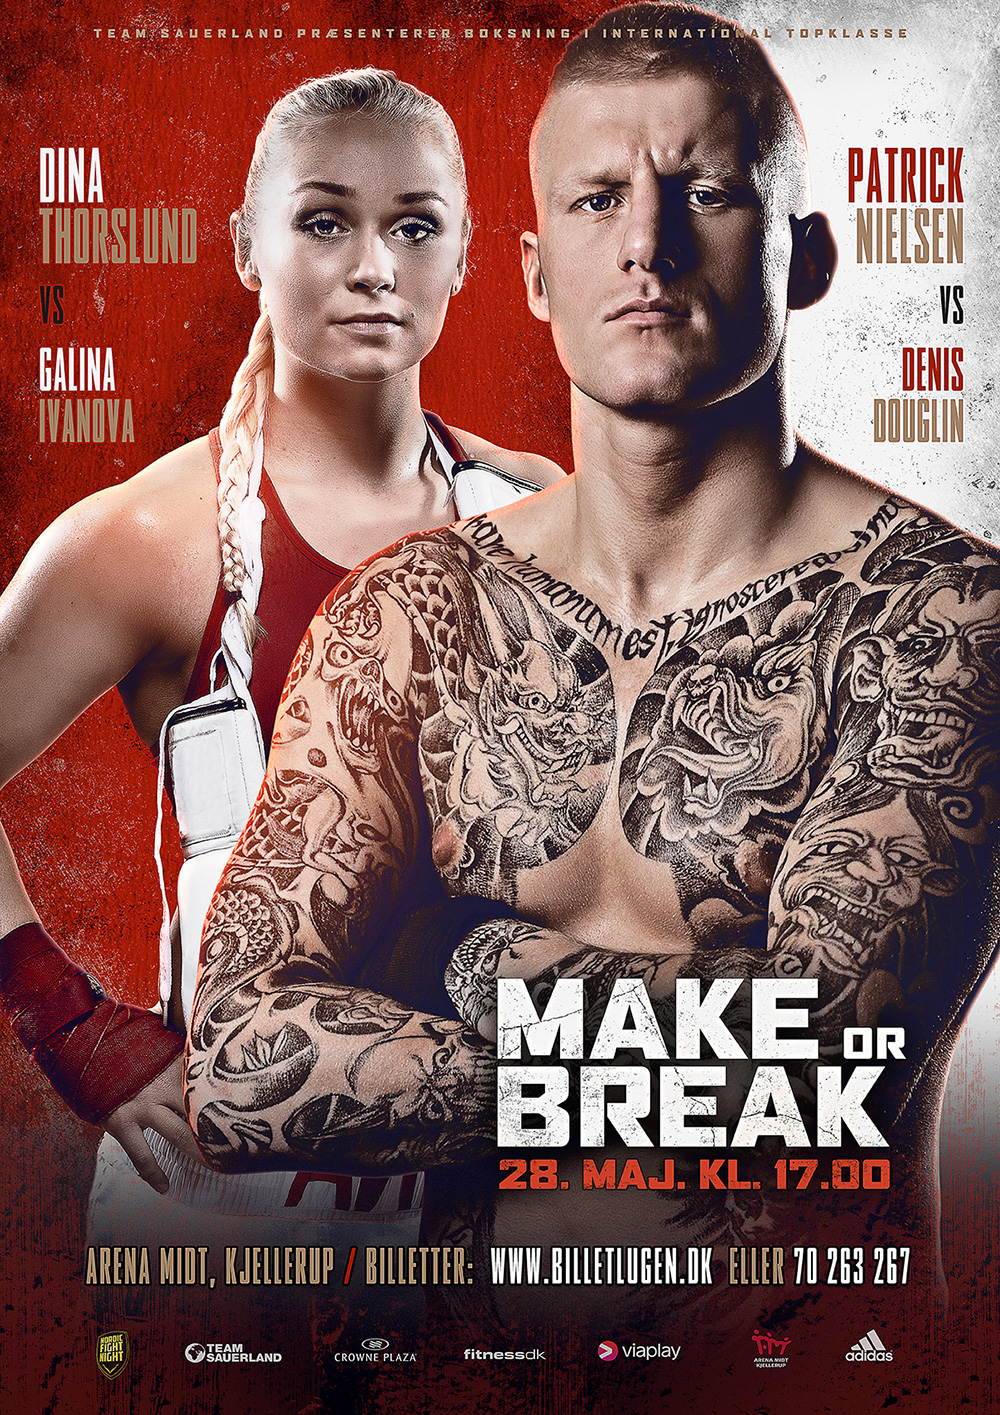 danish fighter patrick nielsen and dina thorslund fight poster